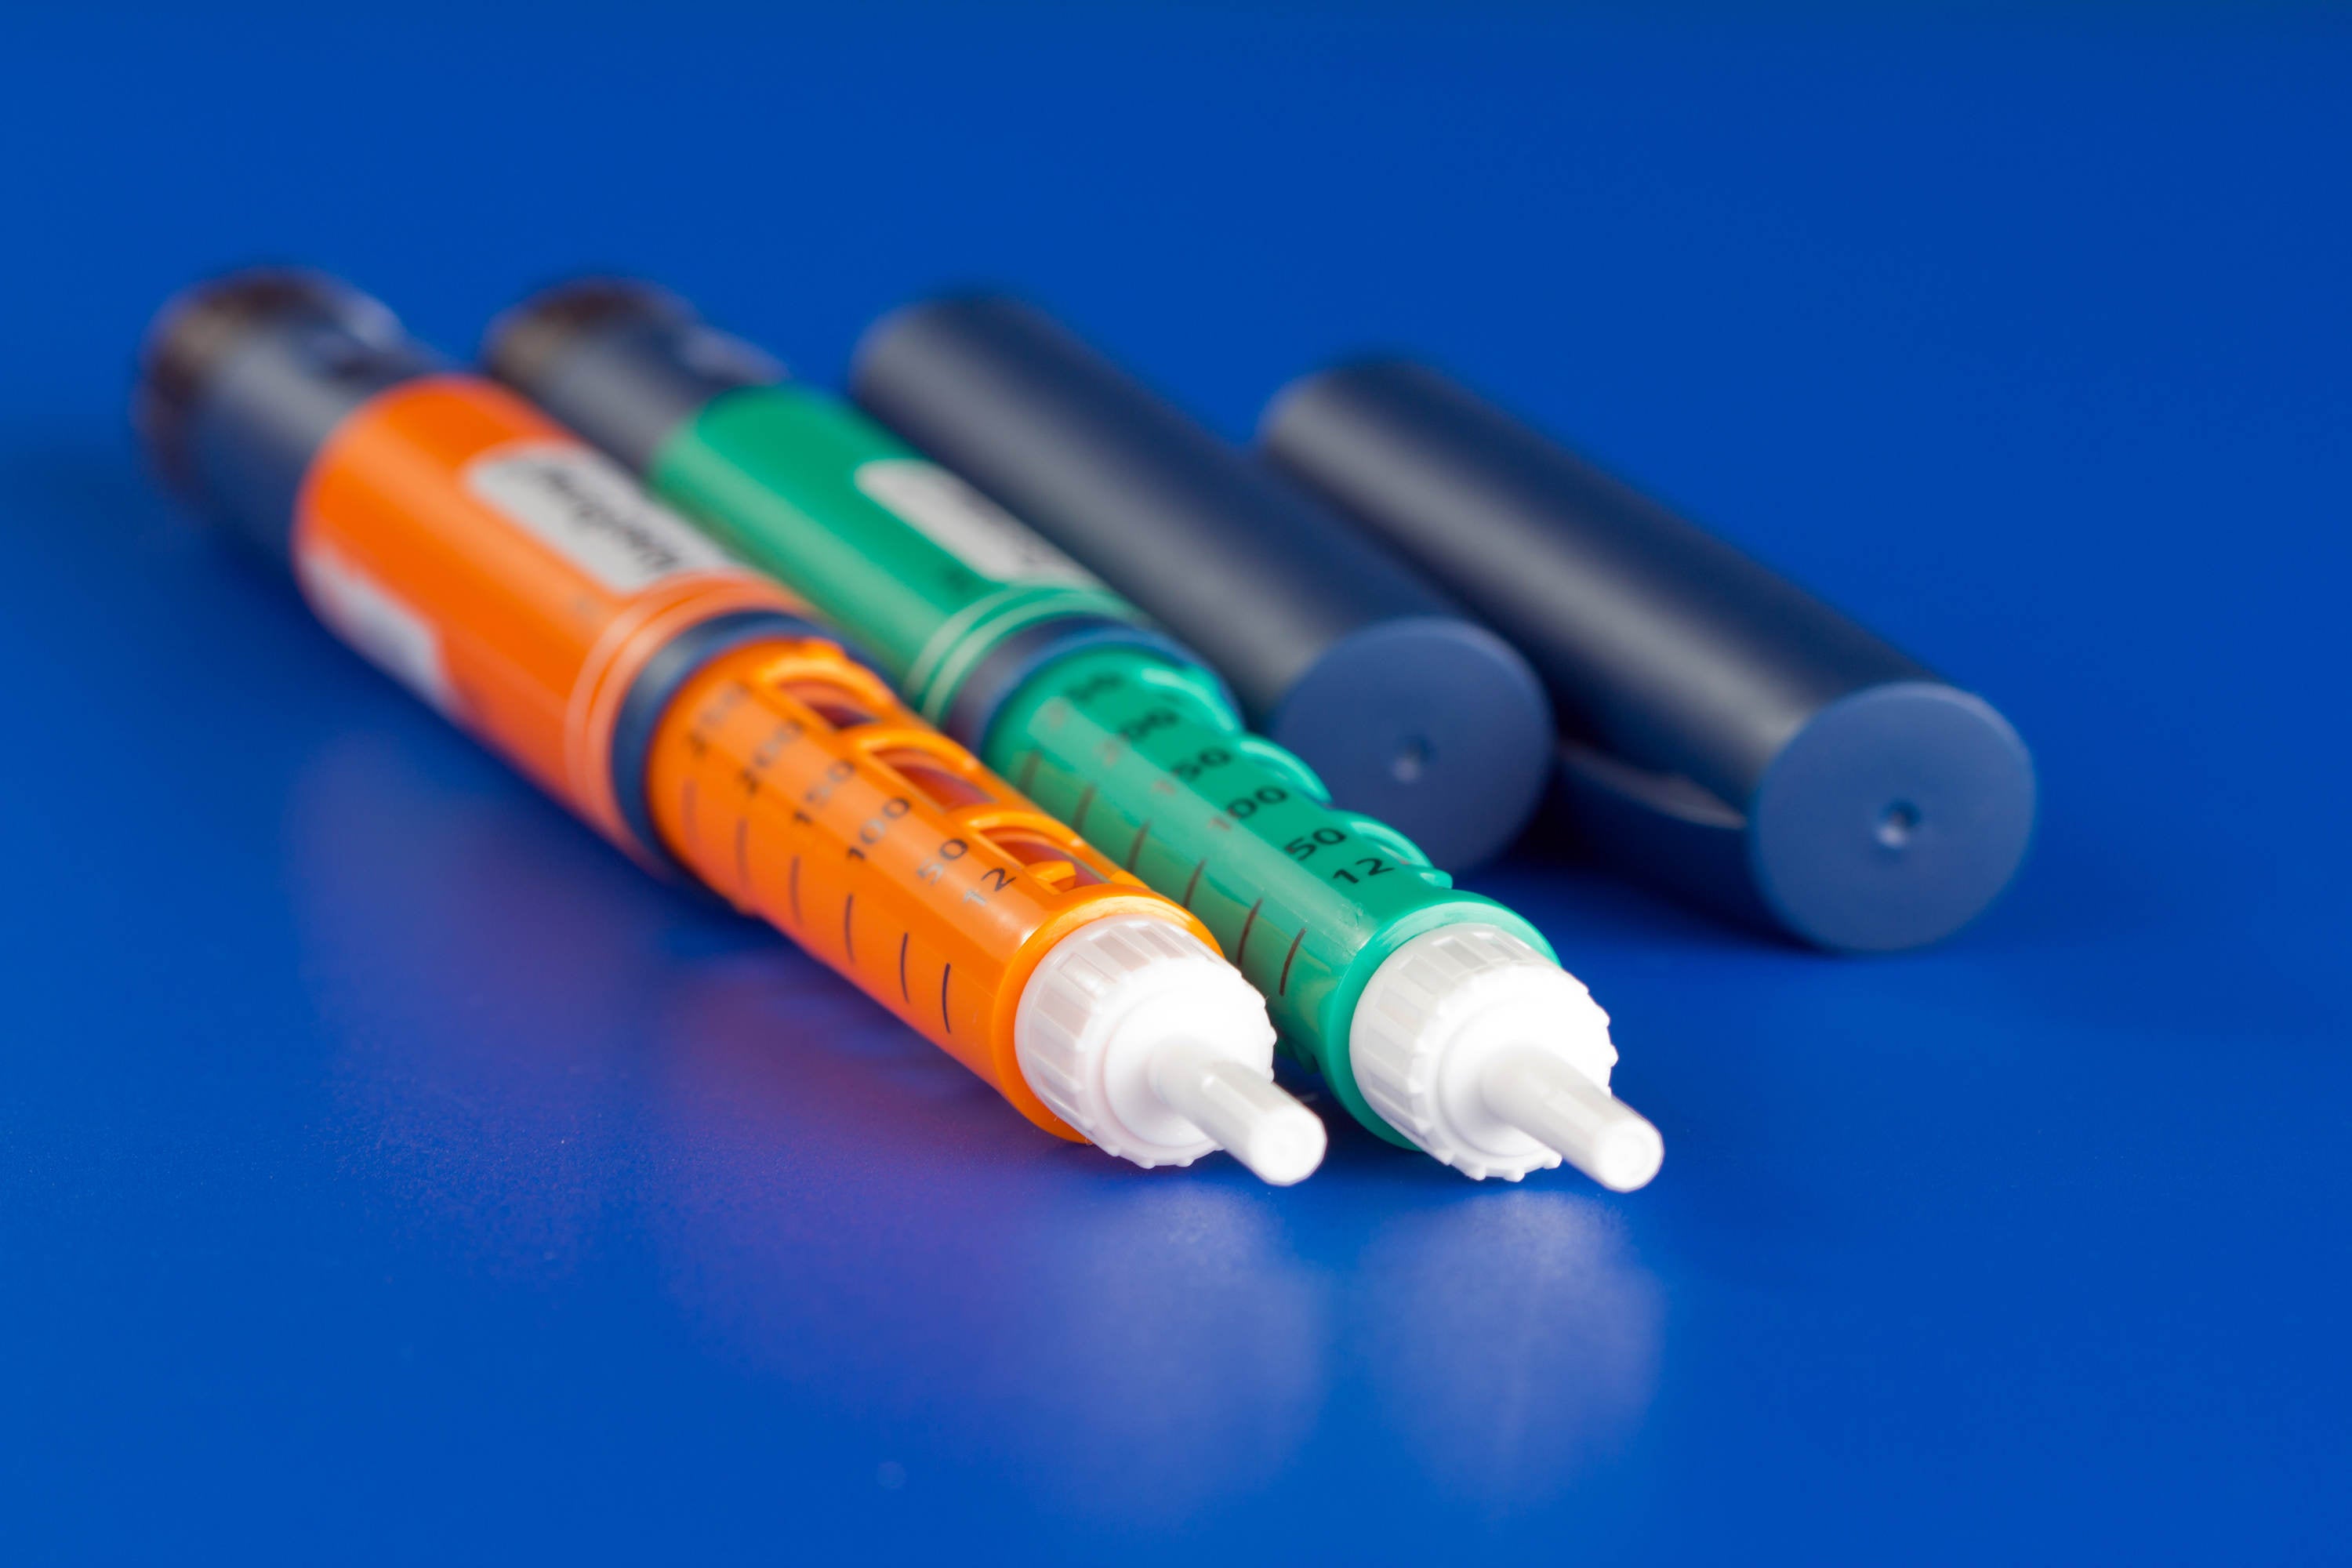 image of colorful syringes used for dispensing pharmaceuticals